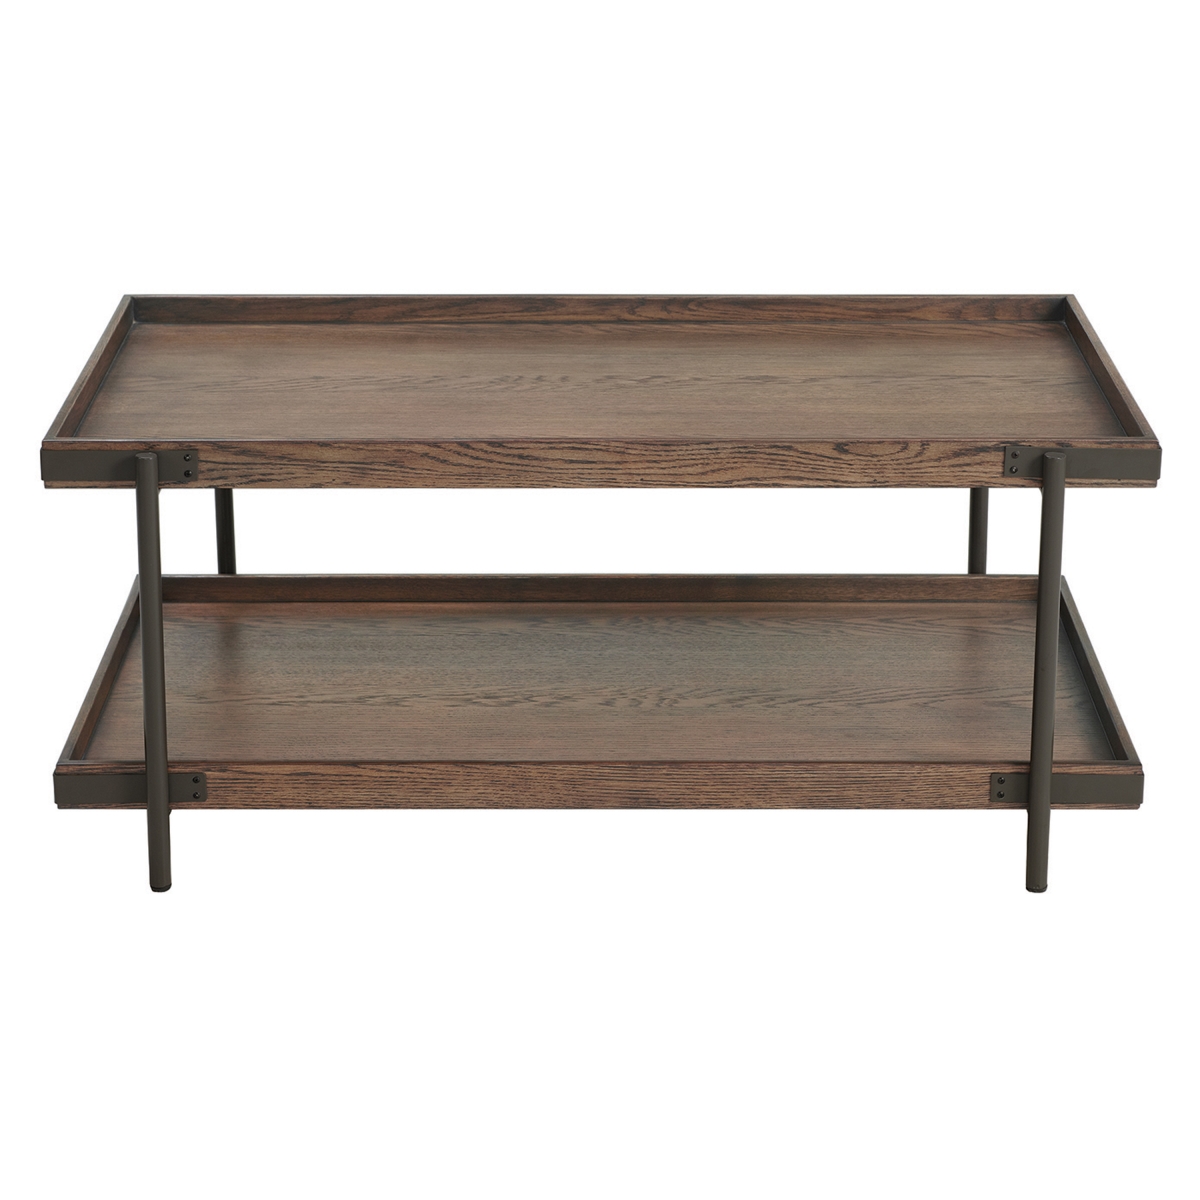 Picture of Alaterre ANKY11RBG 42 in. Kyra Oak & Metal Coffee Table with Shelf